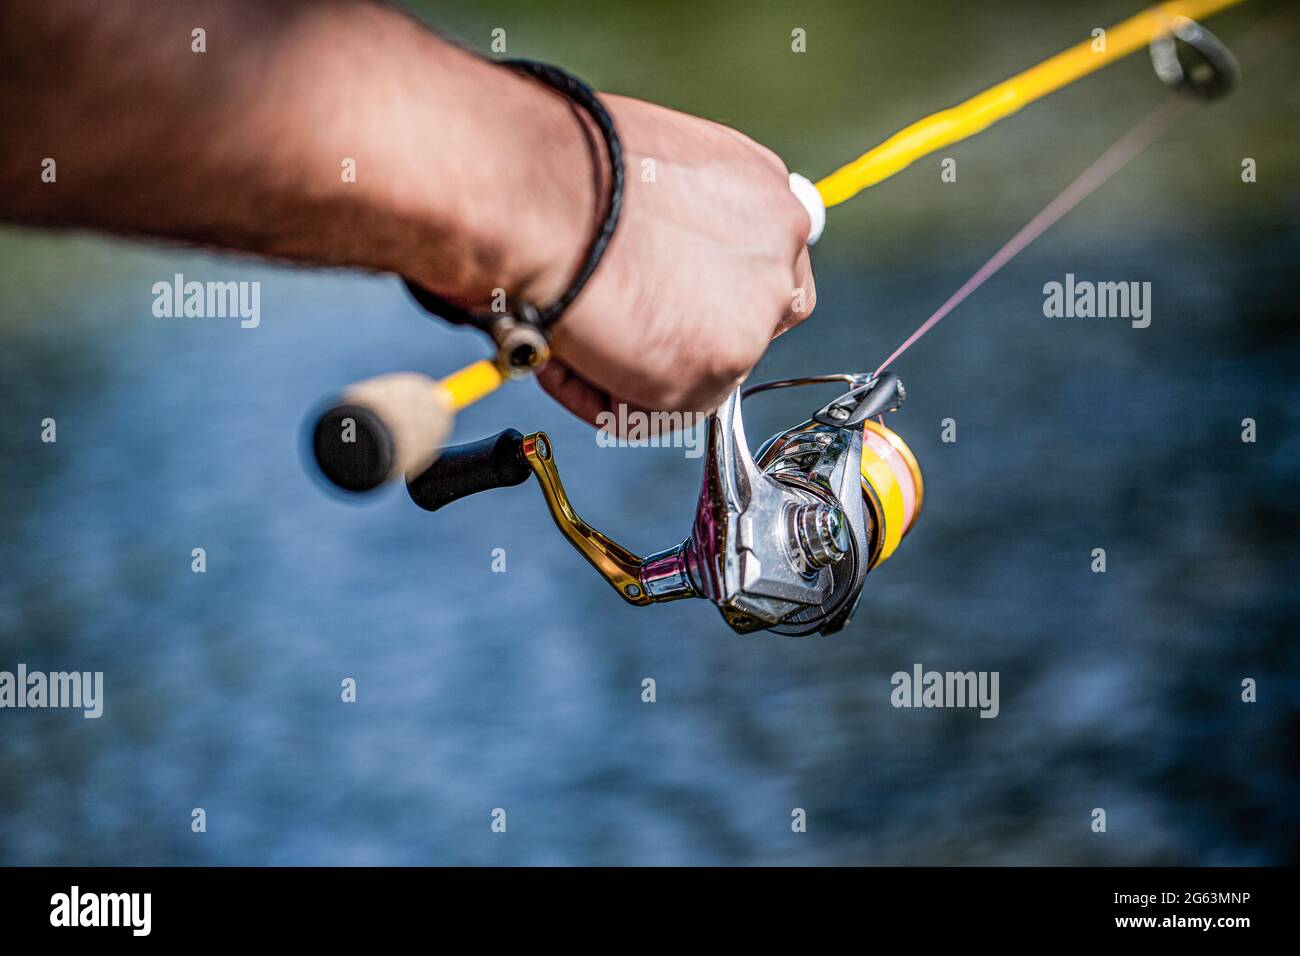 Fisherman hand holding fishing rod with reel. Fishing Reel. Fishing Rod  with Aluminum Body Spool. Fishing Gear. Fish Supplies and Equipment. Fishing  Stock Photo - Alamy